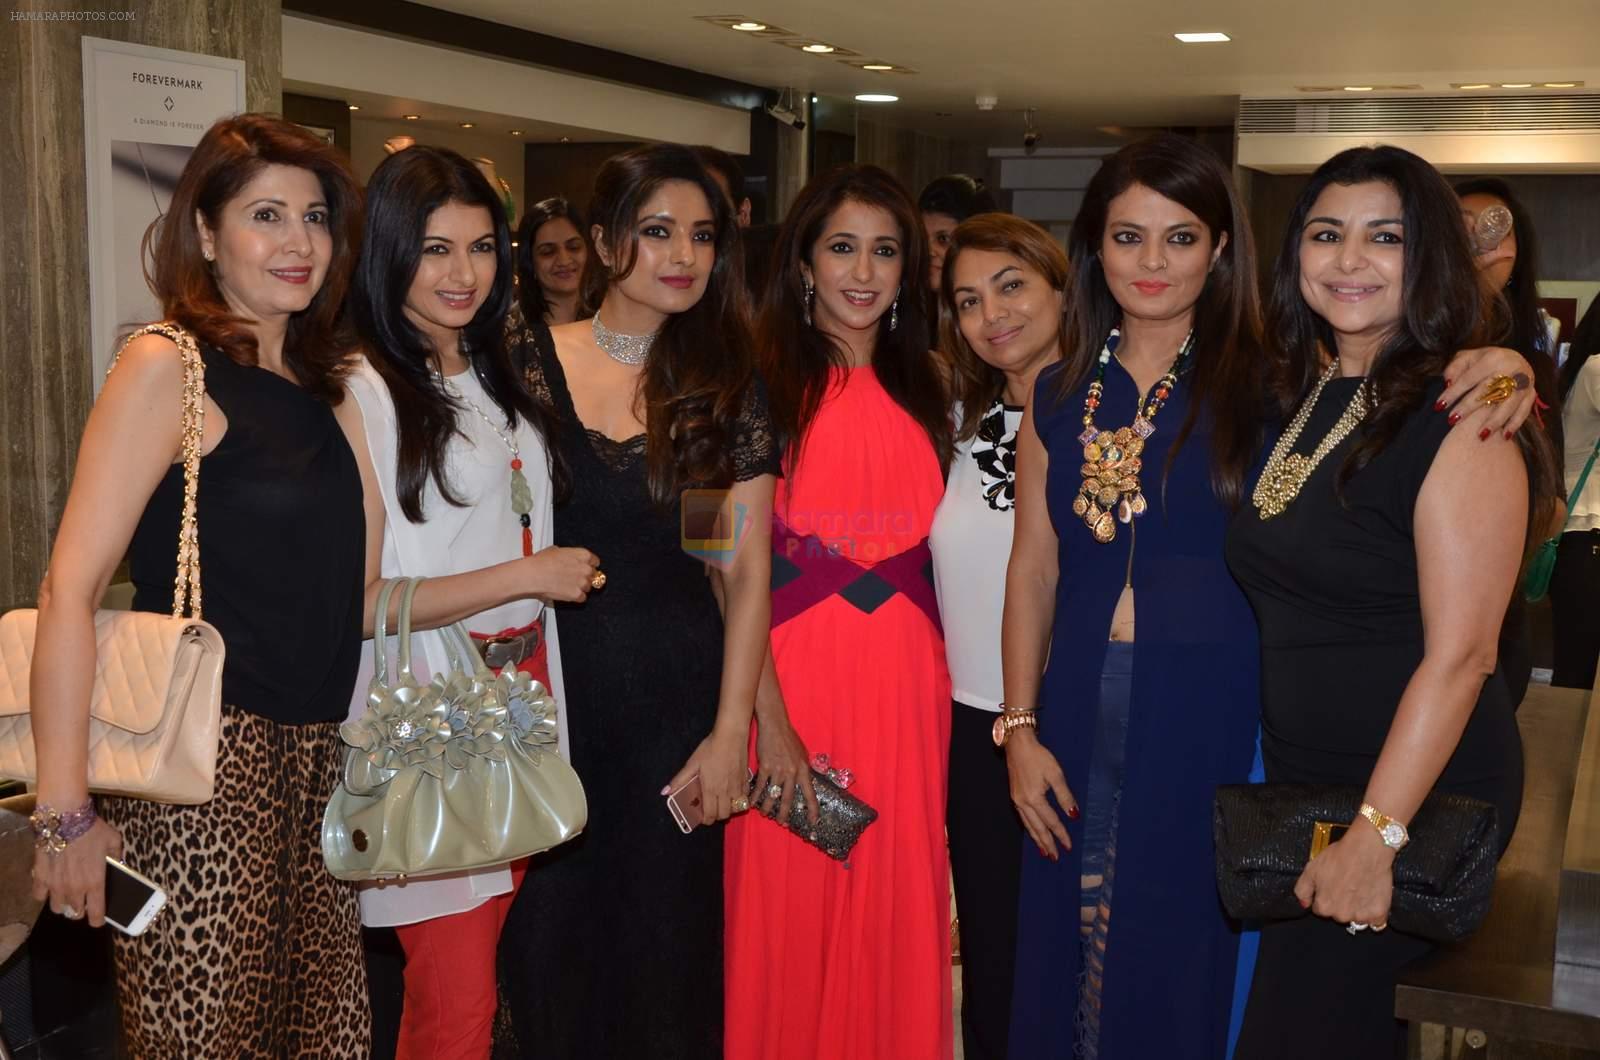 Bhagyashree at Mahesh Notandas store for festive collection launch on 23rd Oct 2015